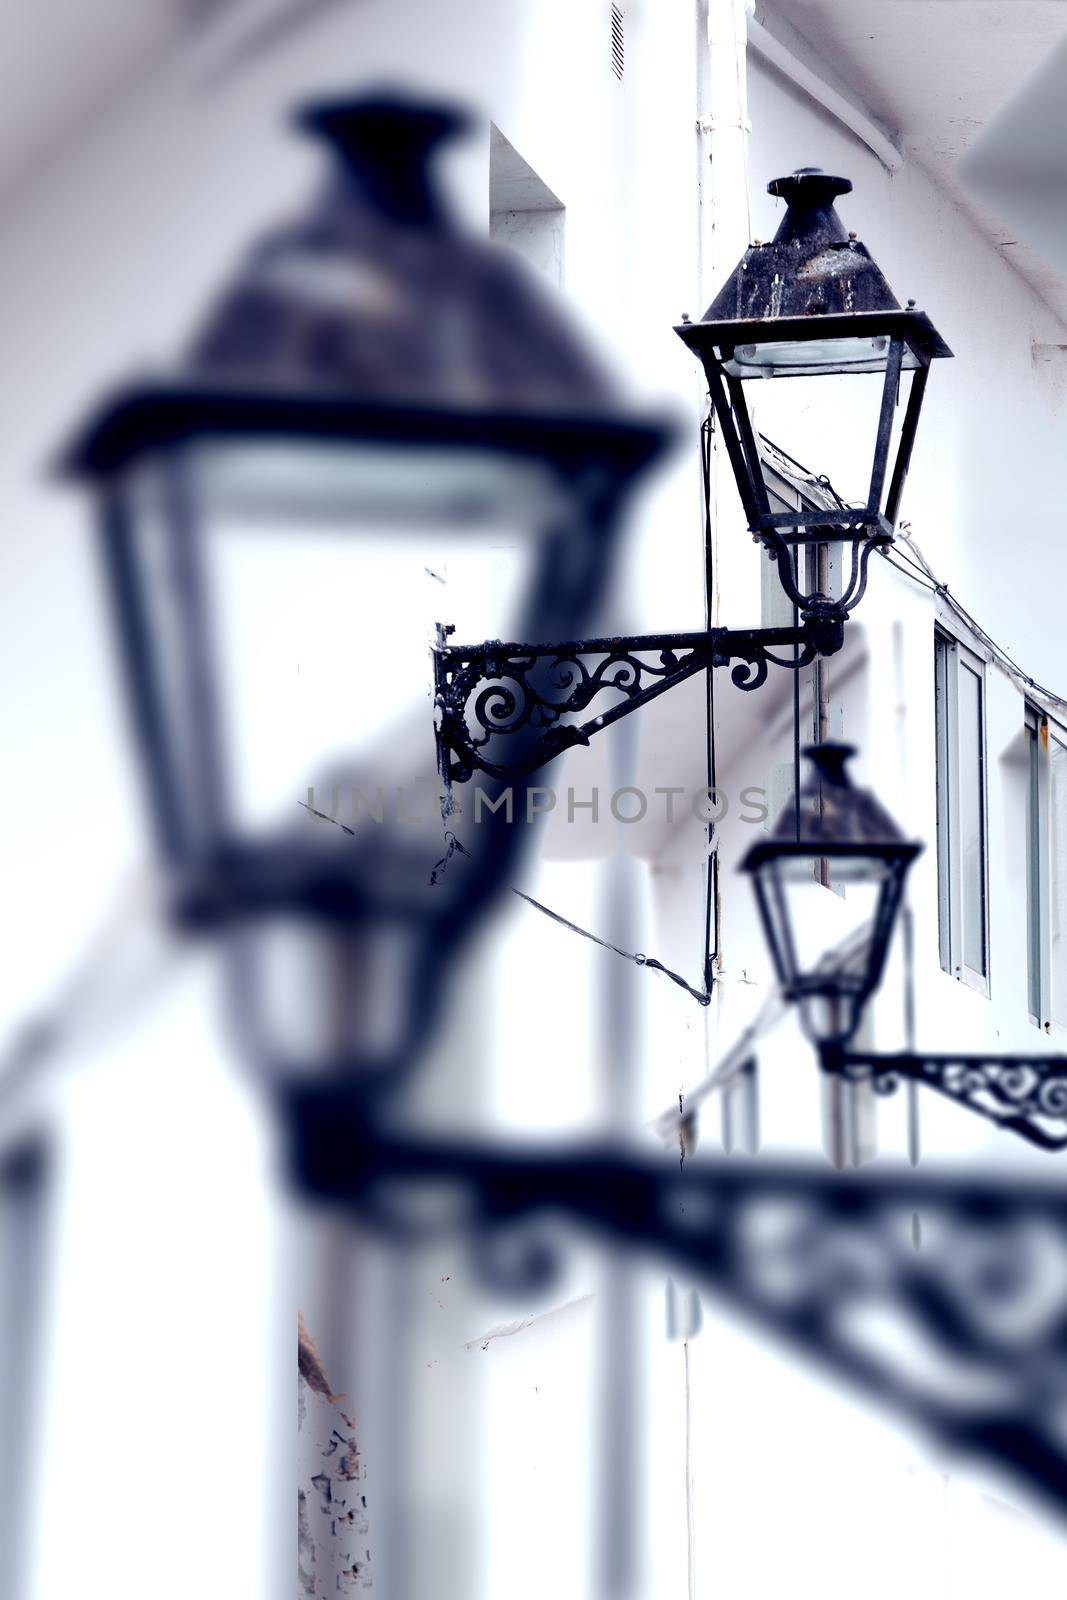 Antique street lamp abstract background by carloscastilla